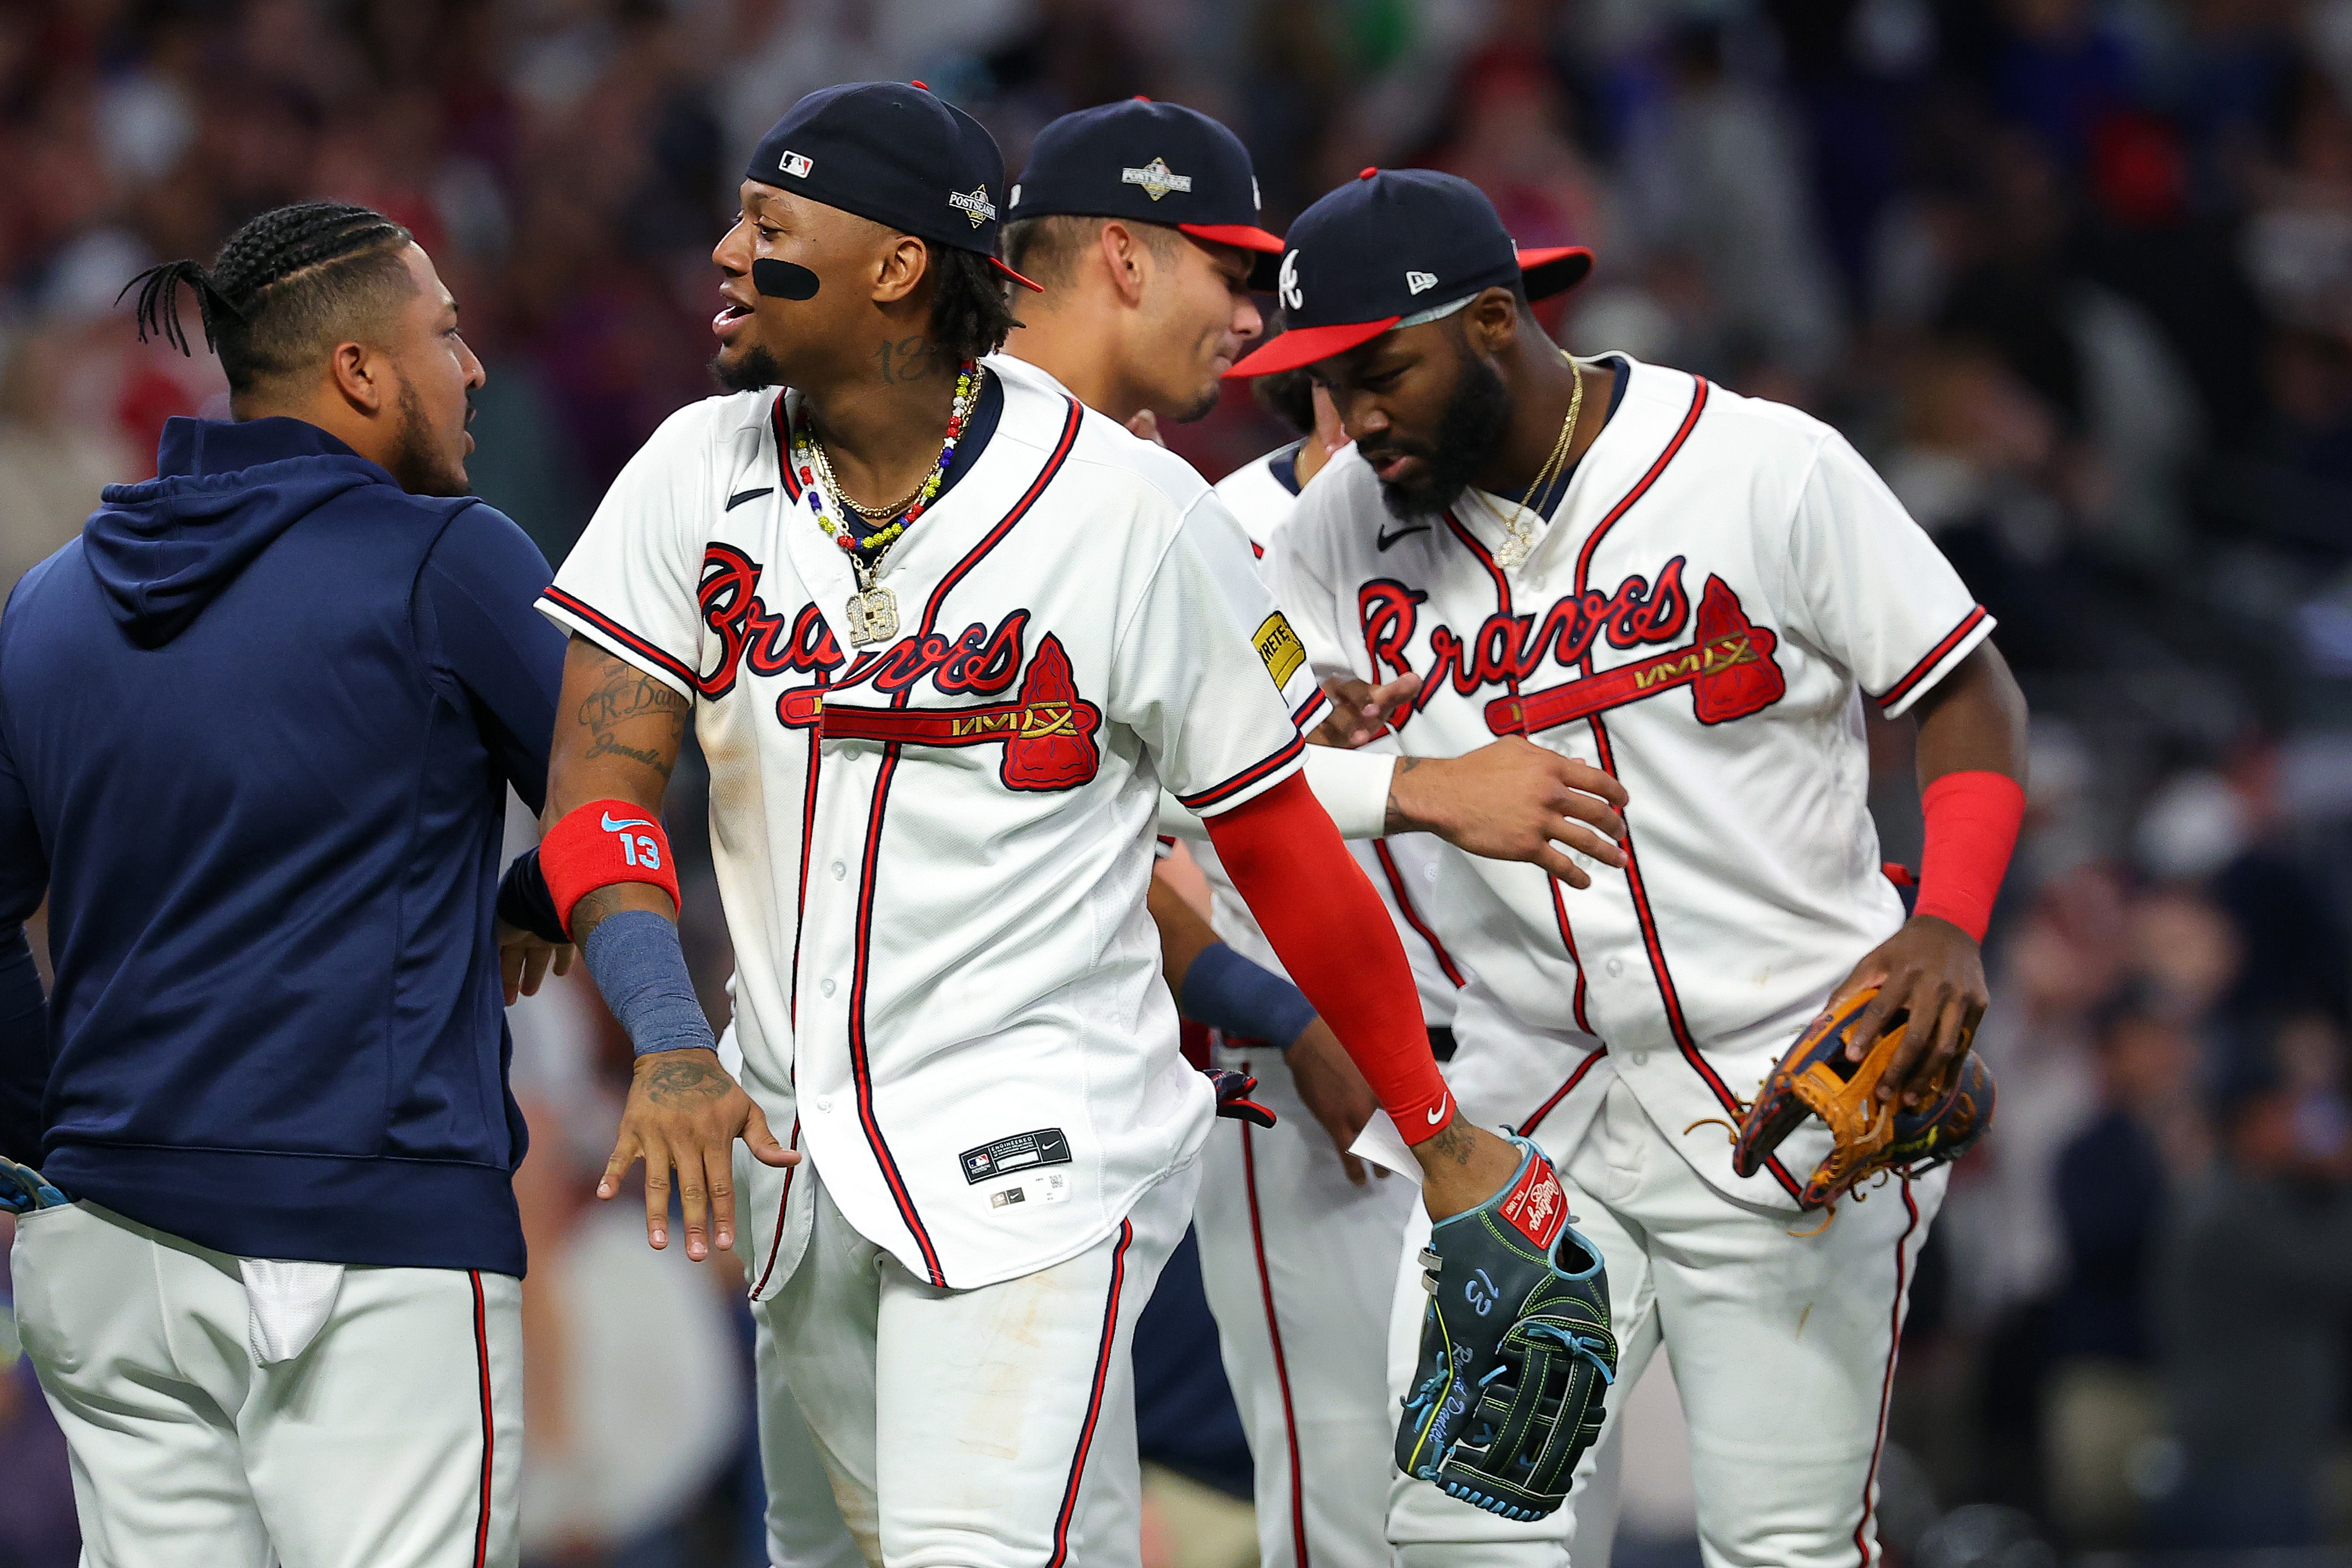 5 reasons the Braves didn't need to trade Andrelton Simmons